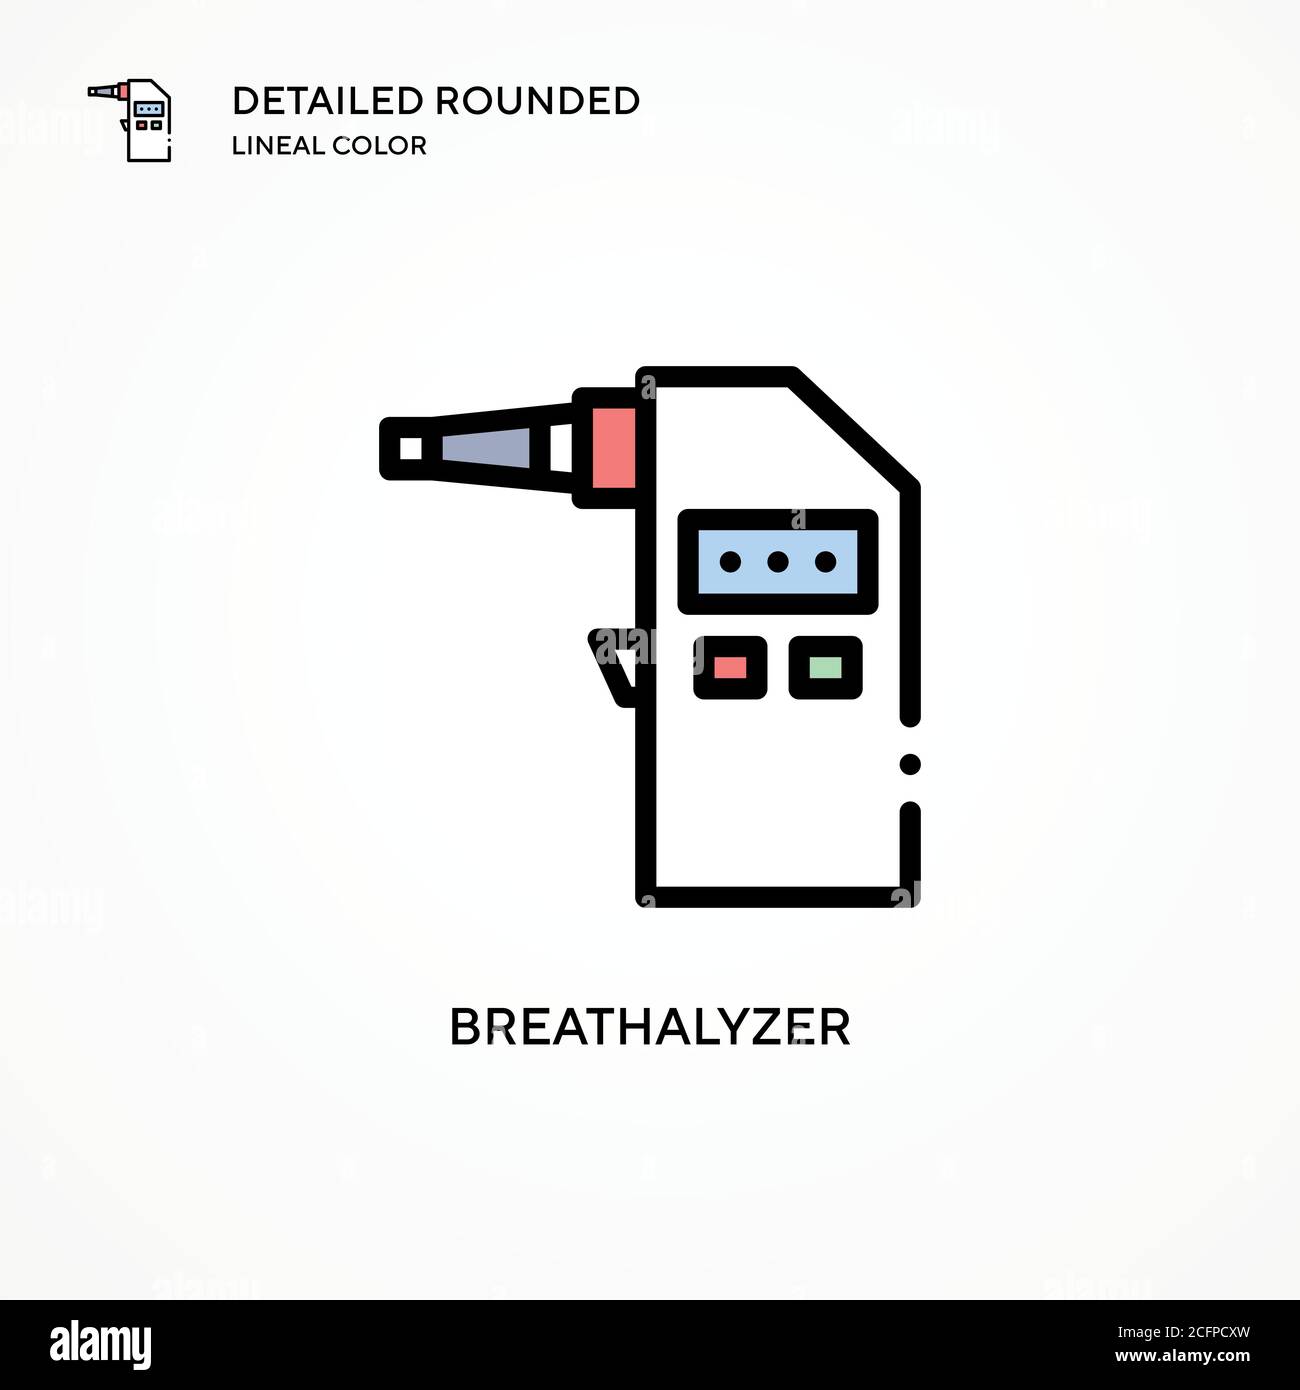 Breathalyzer vector icon. Modern vector illustration concepts. Easy to edit and customize. Stock Vector